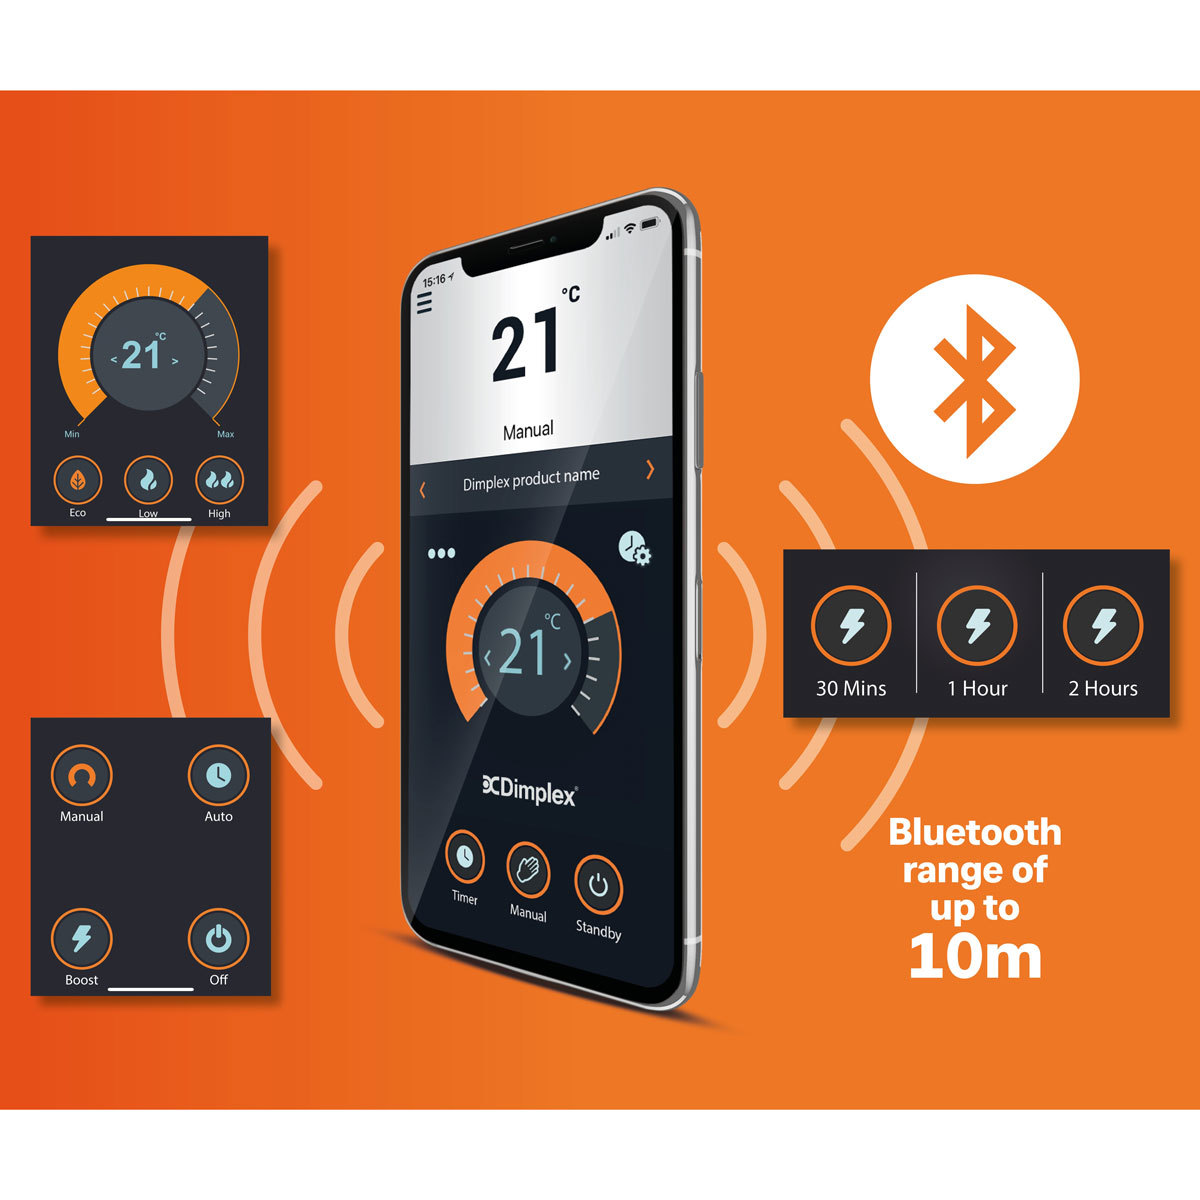 Radiator features shown on mobile phone app, highlighting Bluetooth range 10m